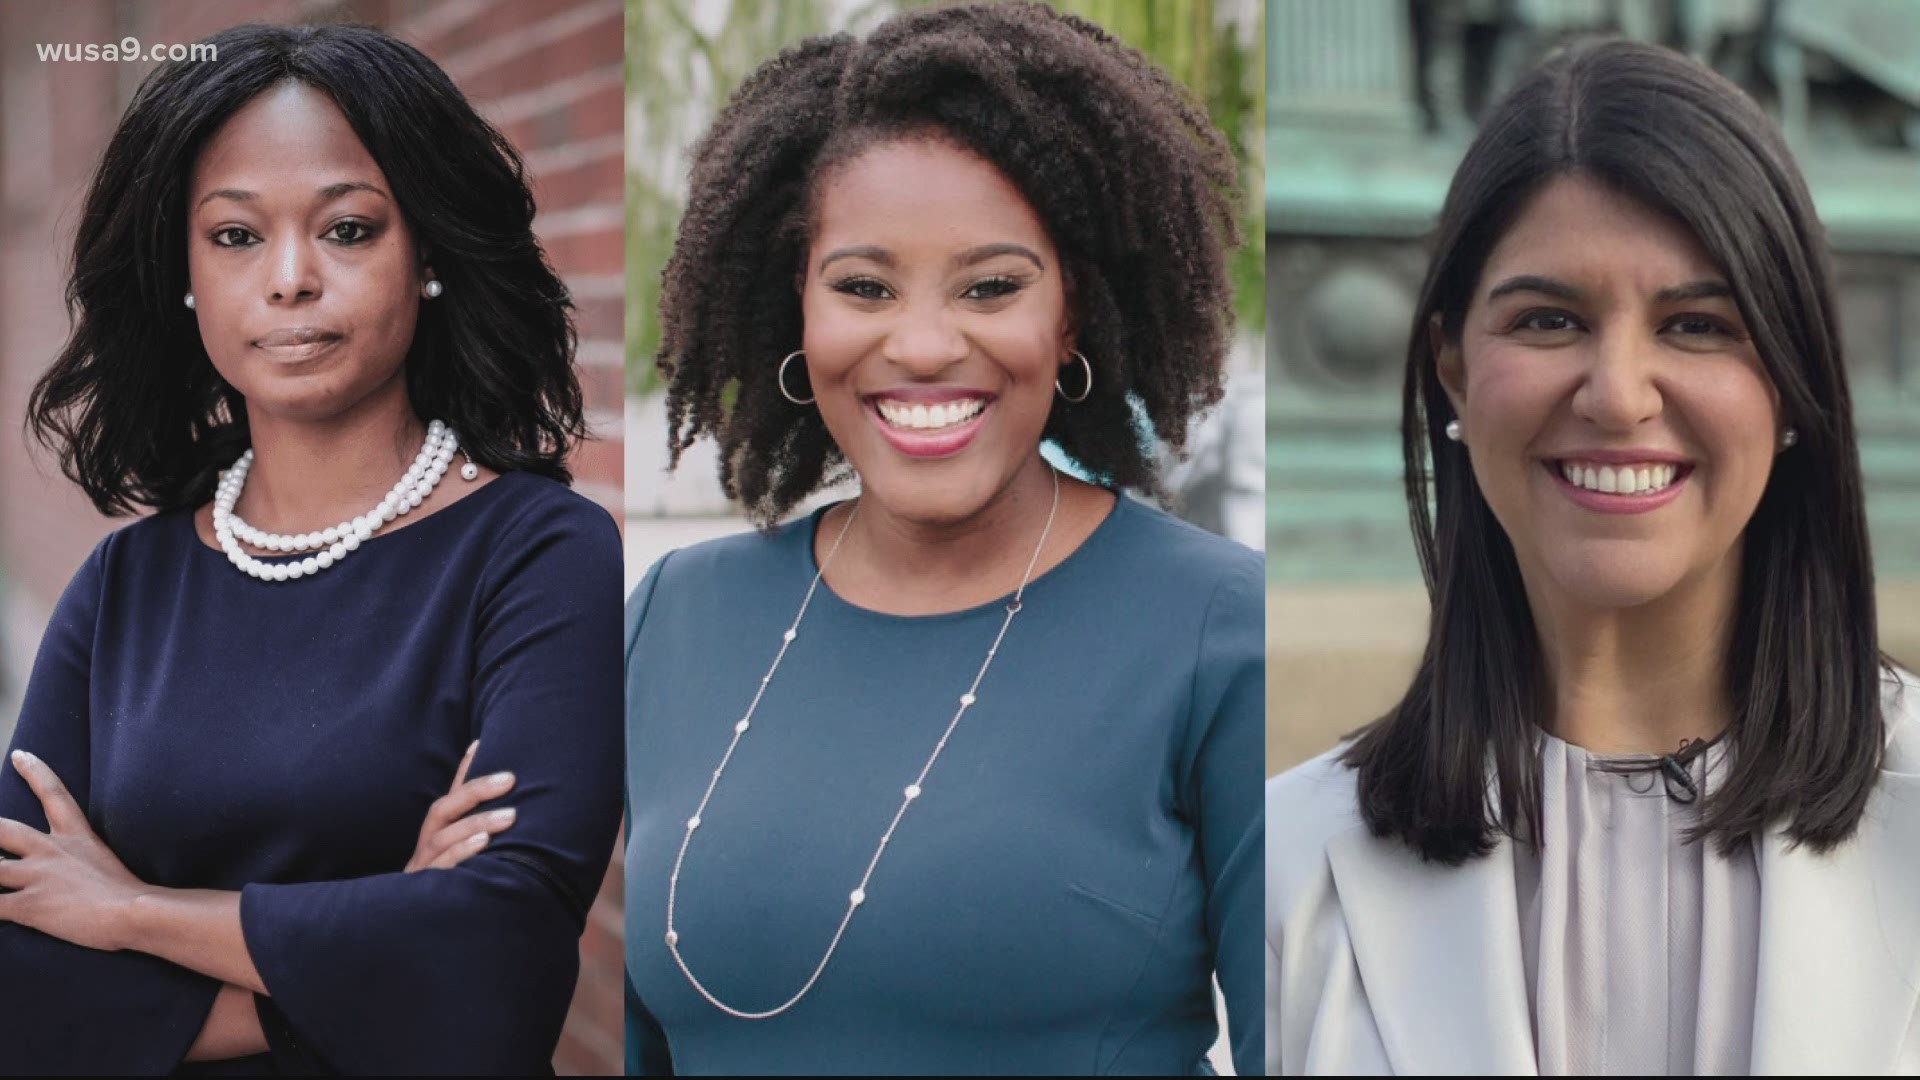 Christina Henderson, Brooke Pinto and Janeese L. George solidified a female majority on the DC Council for the first time in more than 2 decades